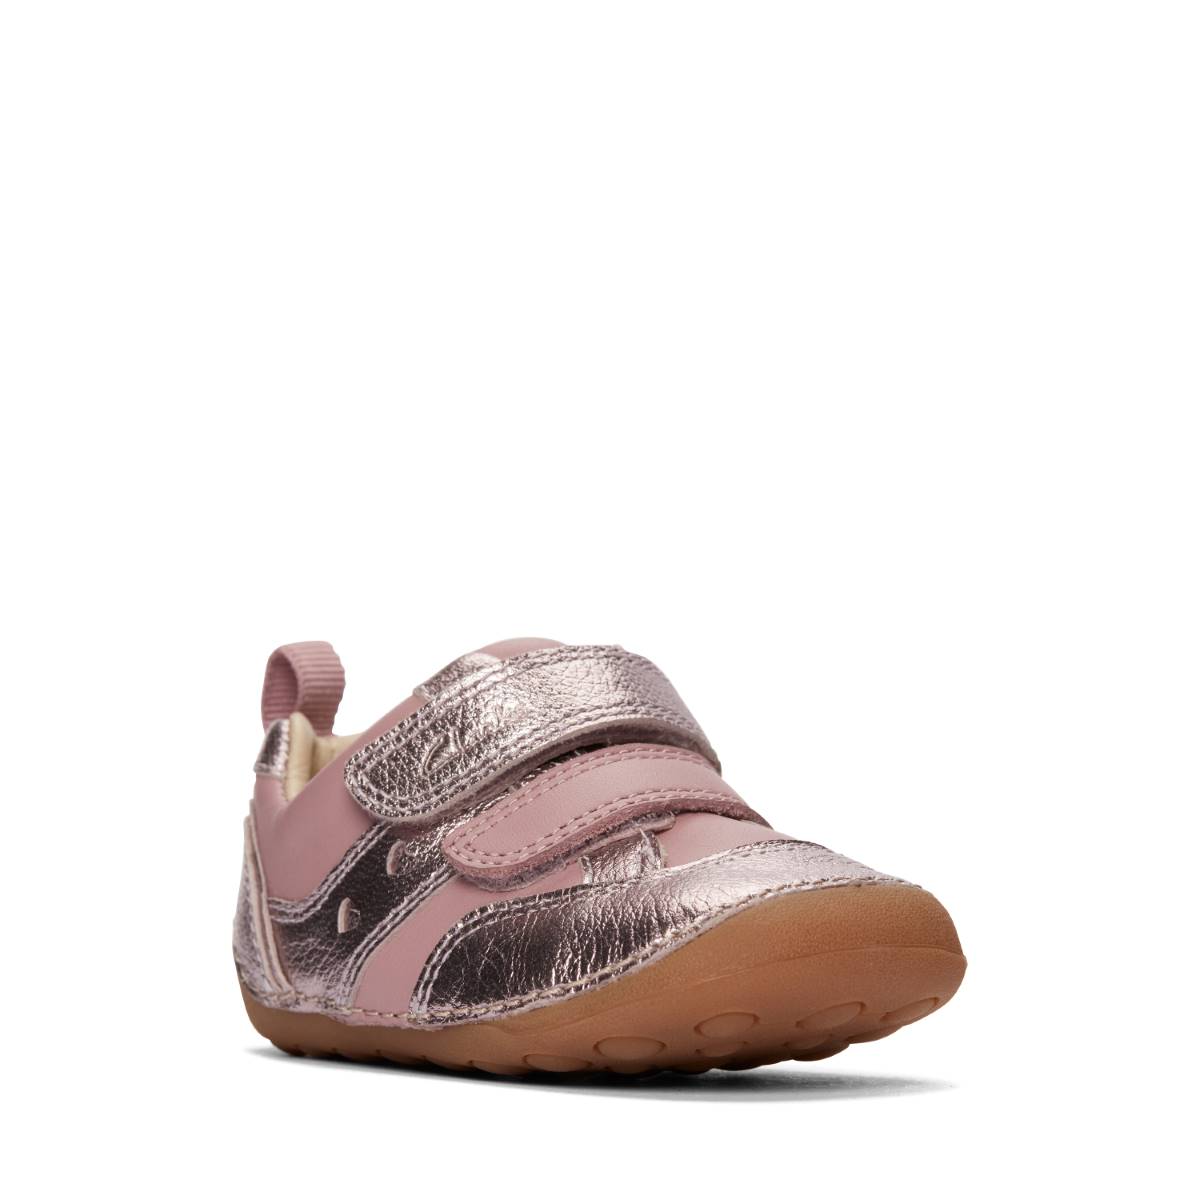 Clarks Tiny Sky T Blush Pink Kids girls first and baby shoes 7528-16F in a Plain Leather in Size 2